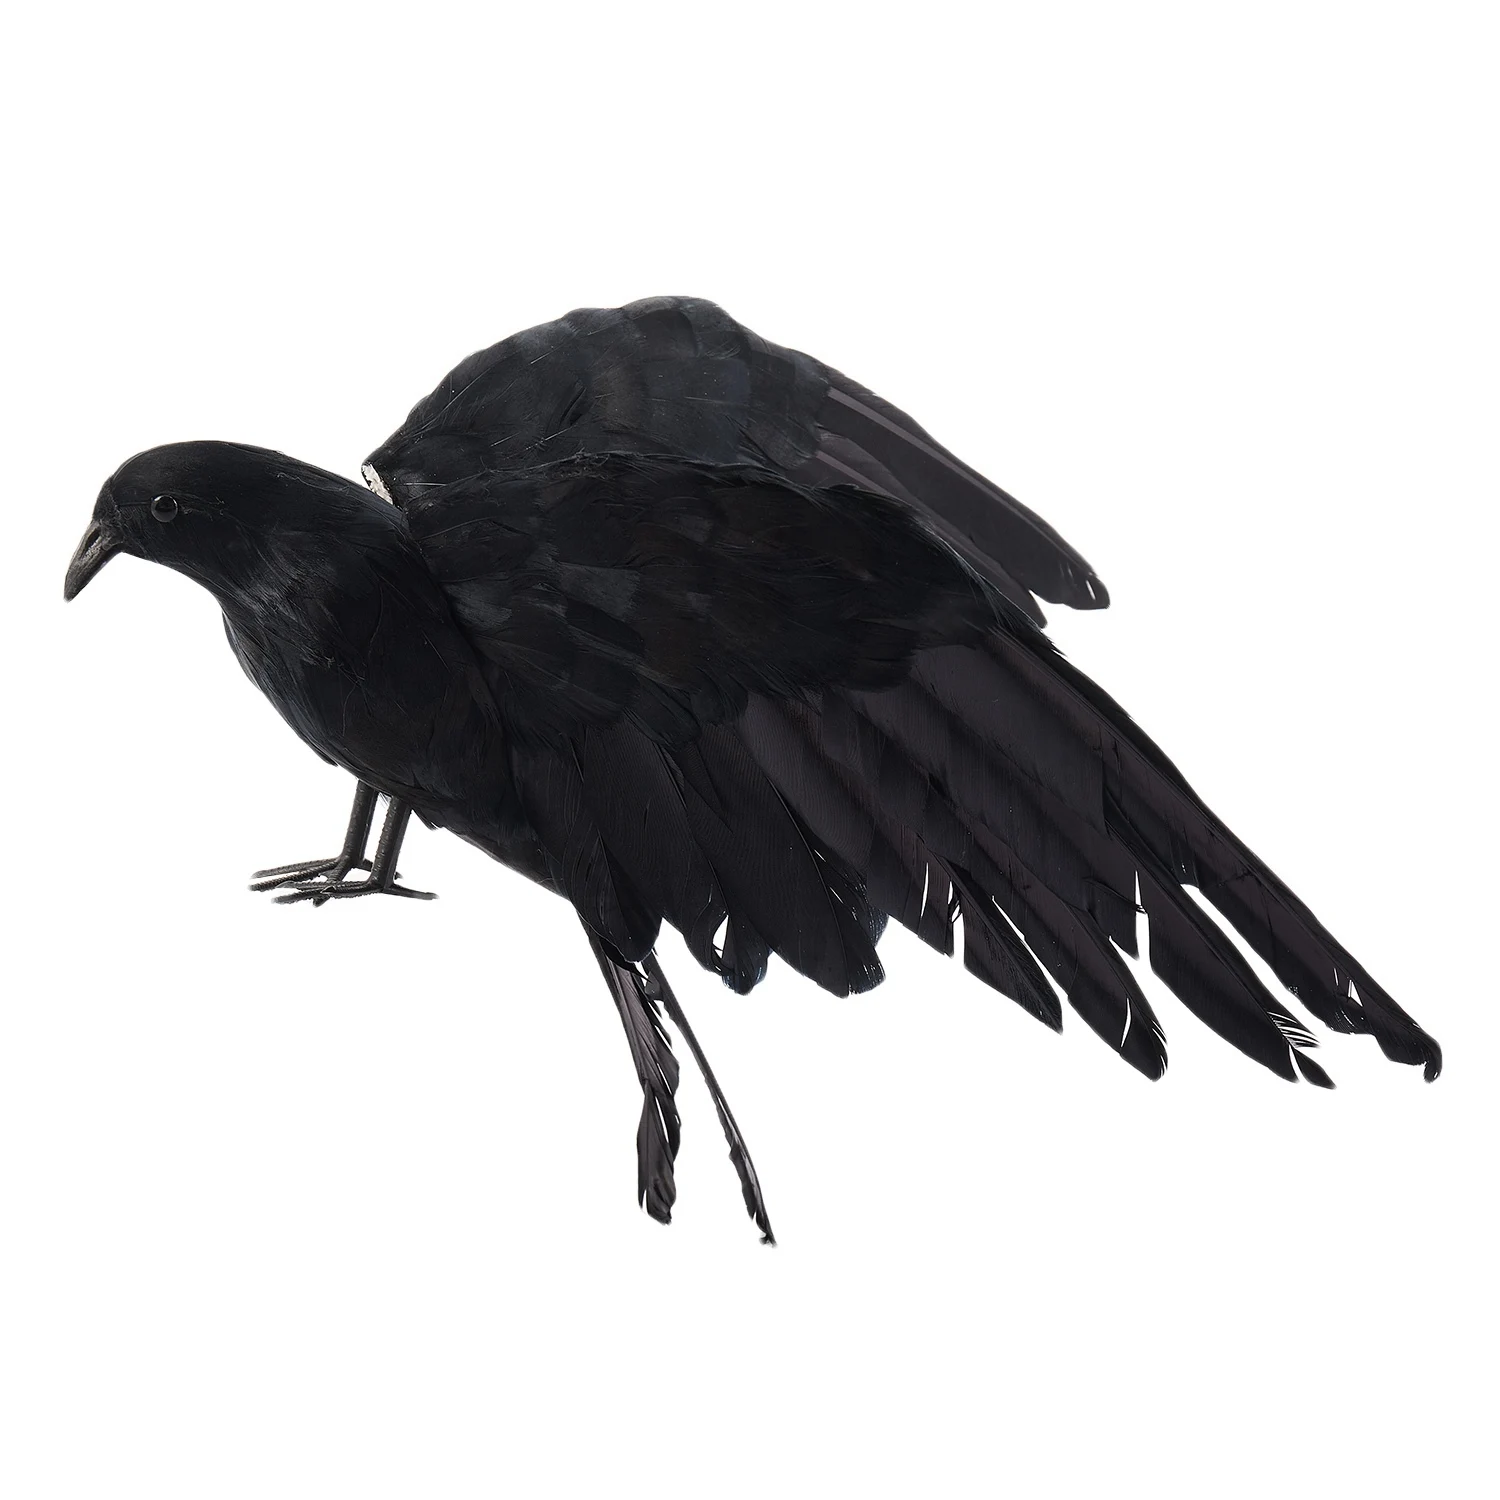 

Halloween prop feathers Crow bird large 25x40cm spreading wings Black Crow toy model toy,Performance prop